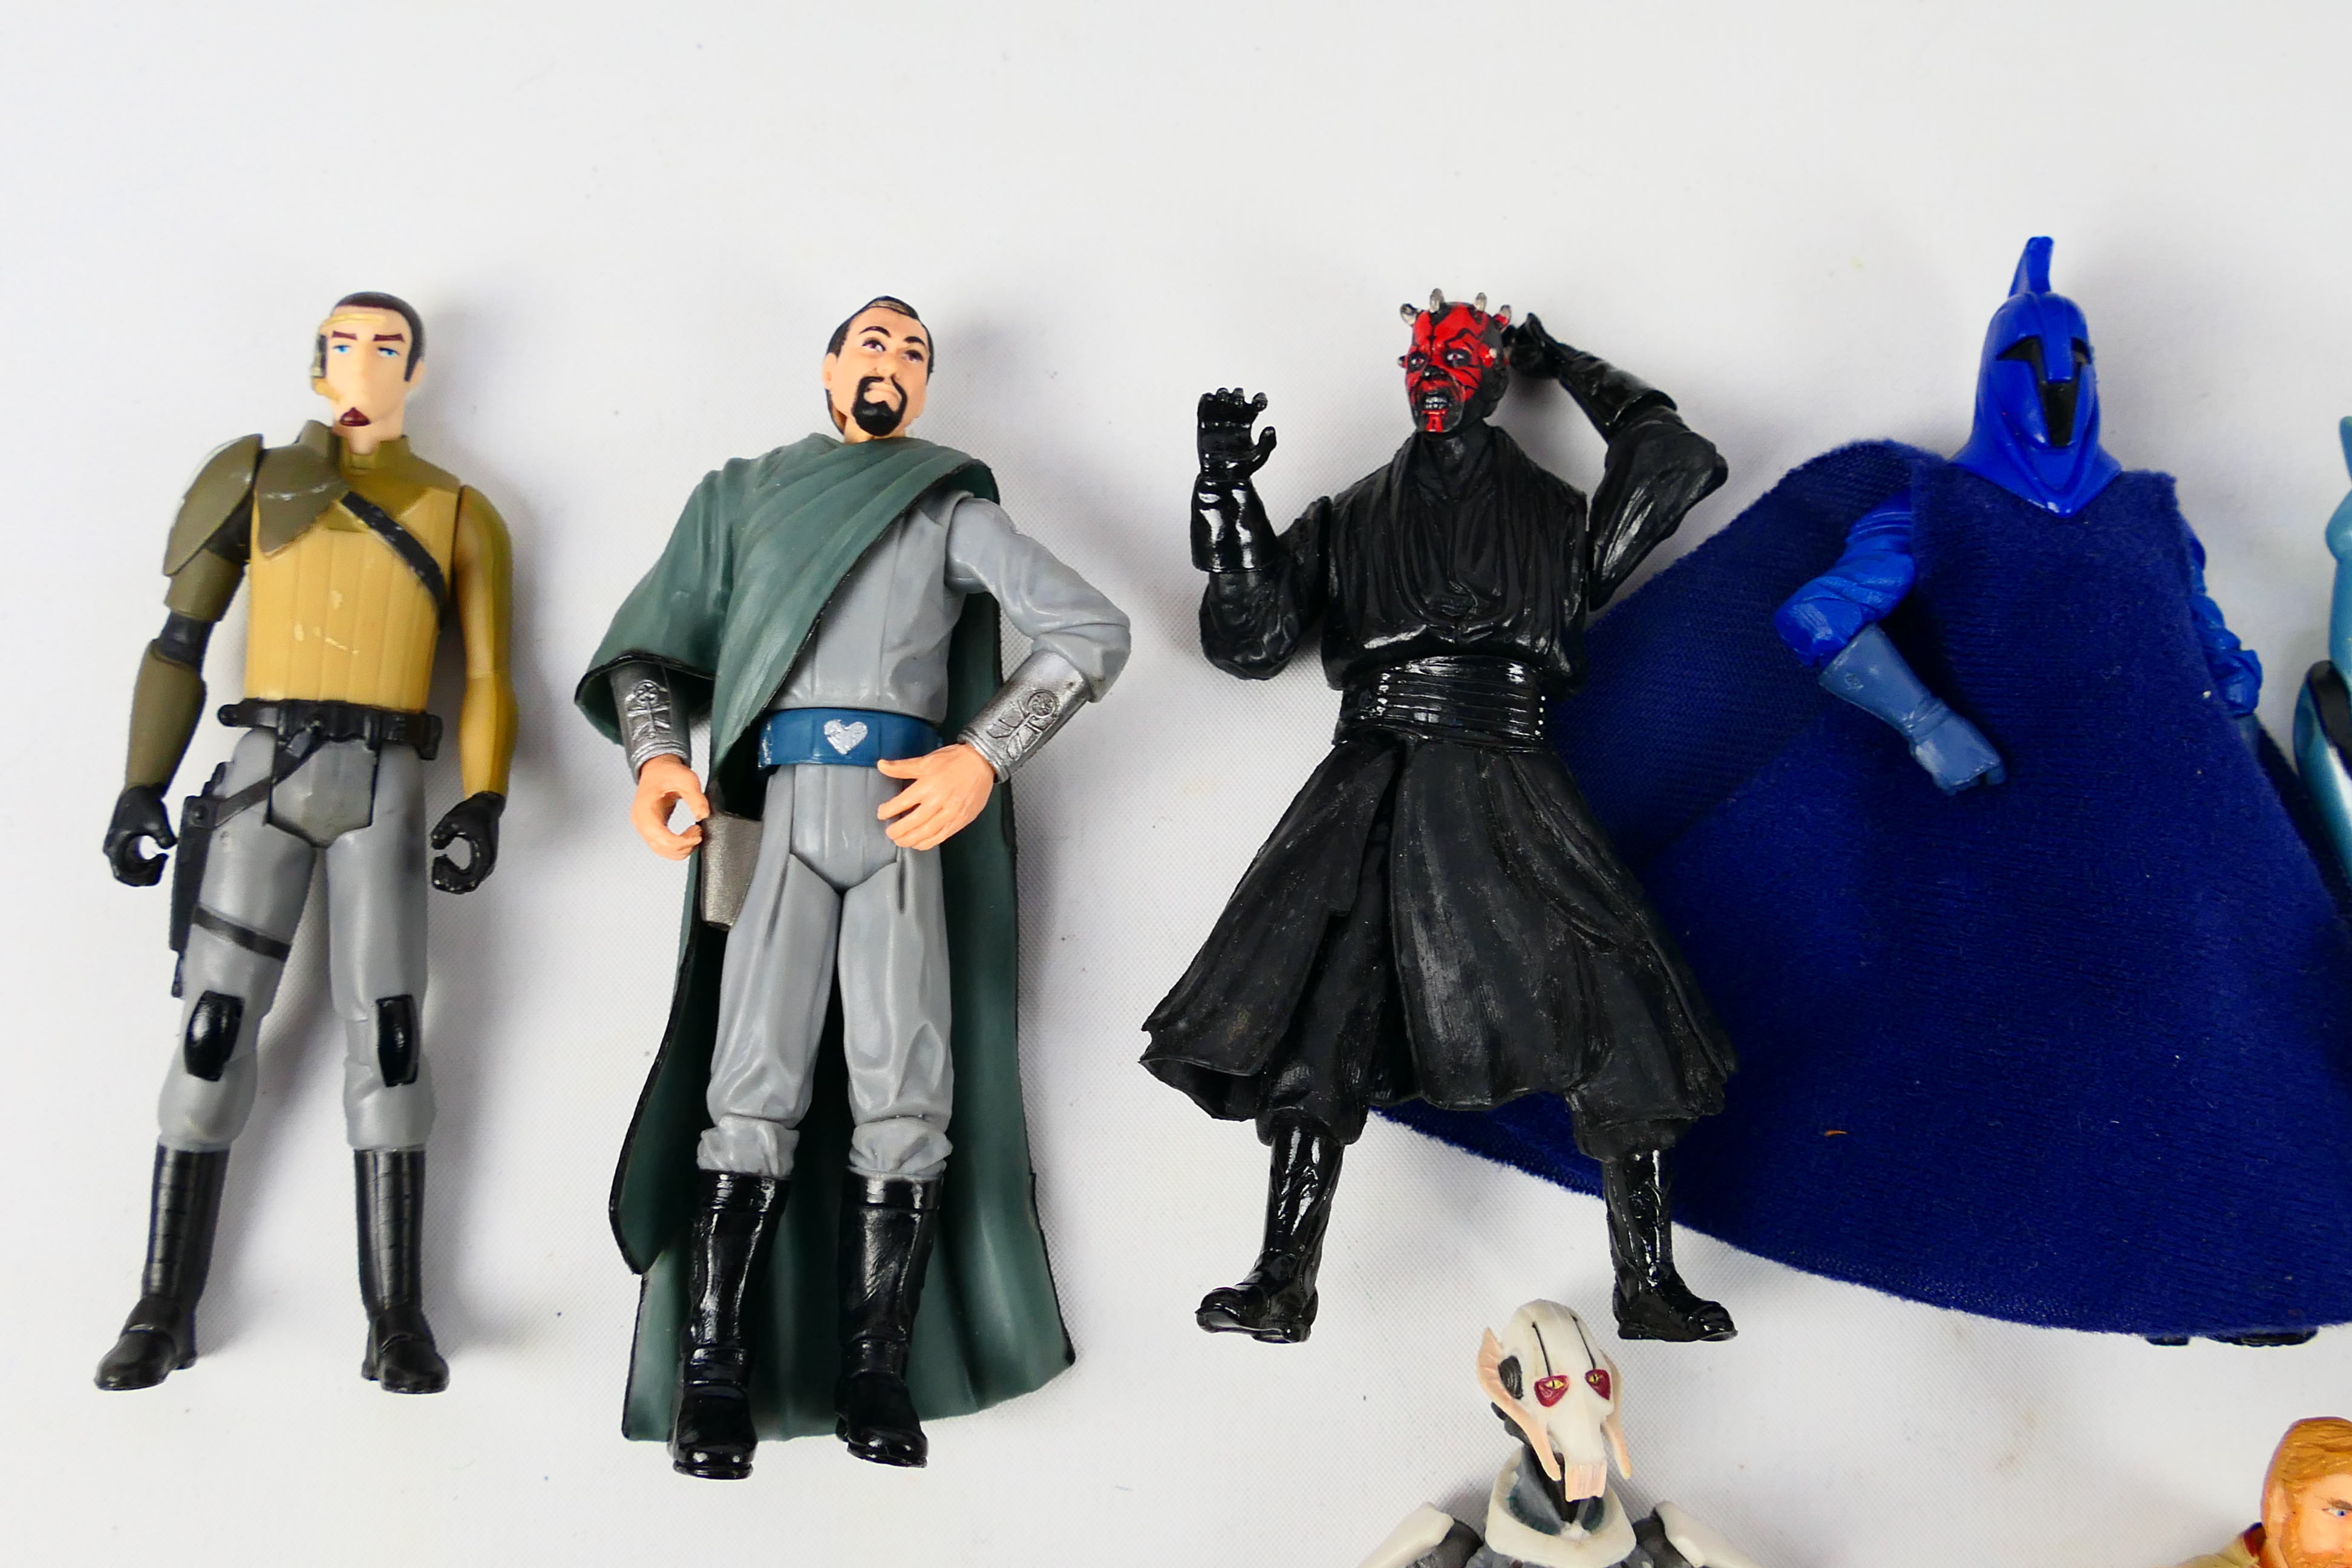 Hasbro - Star Wars - An assortment of unboxed Star Wars action figures in excellent to mint - Image 7 of 10